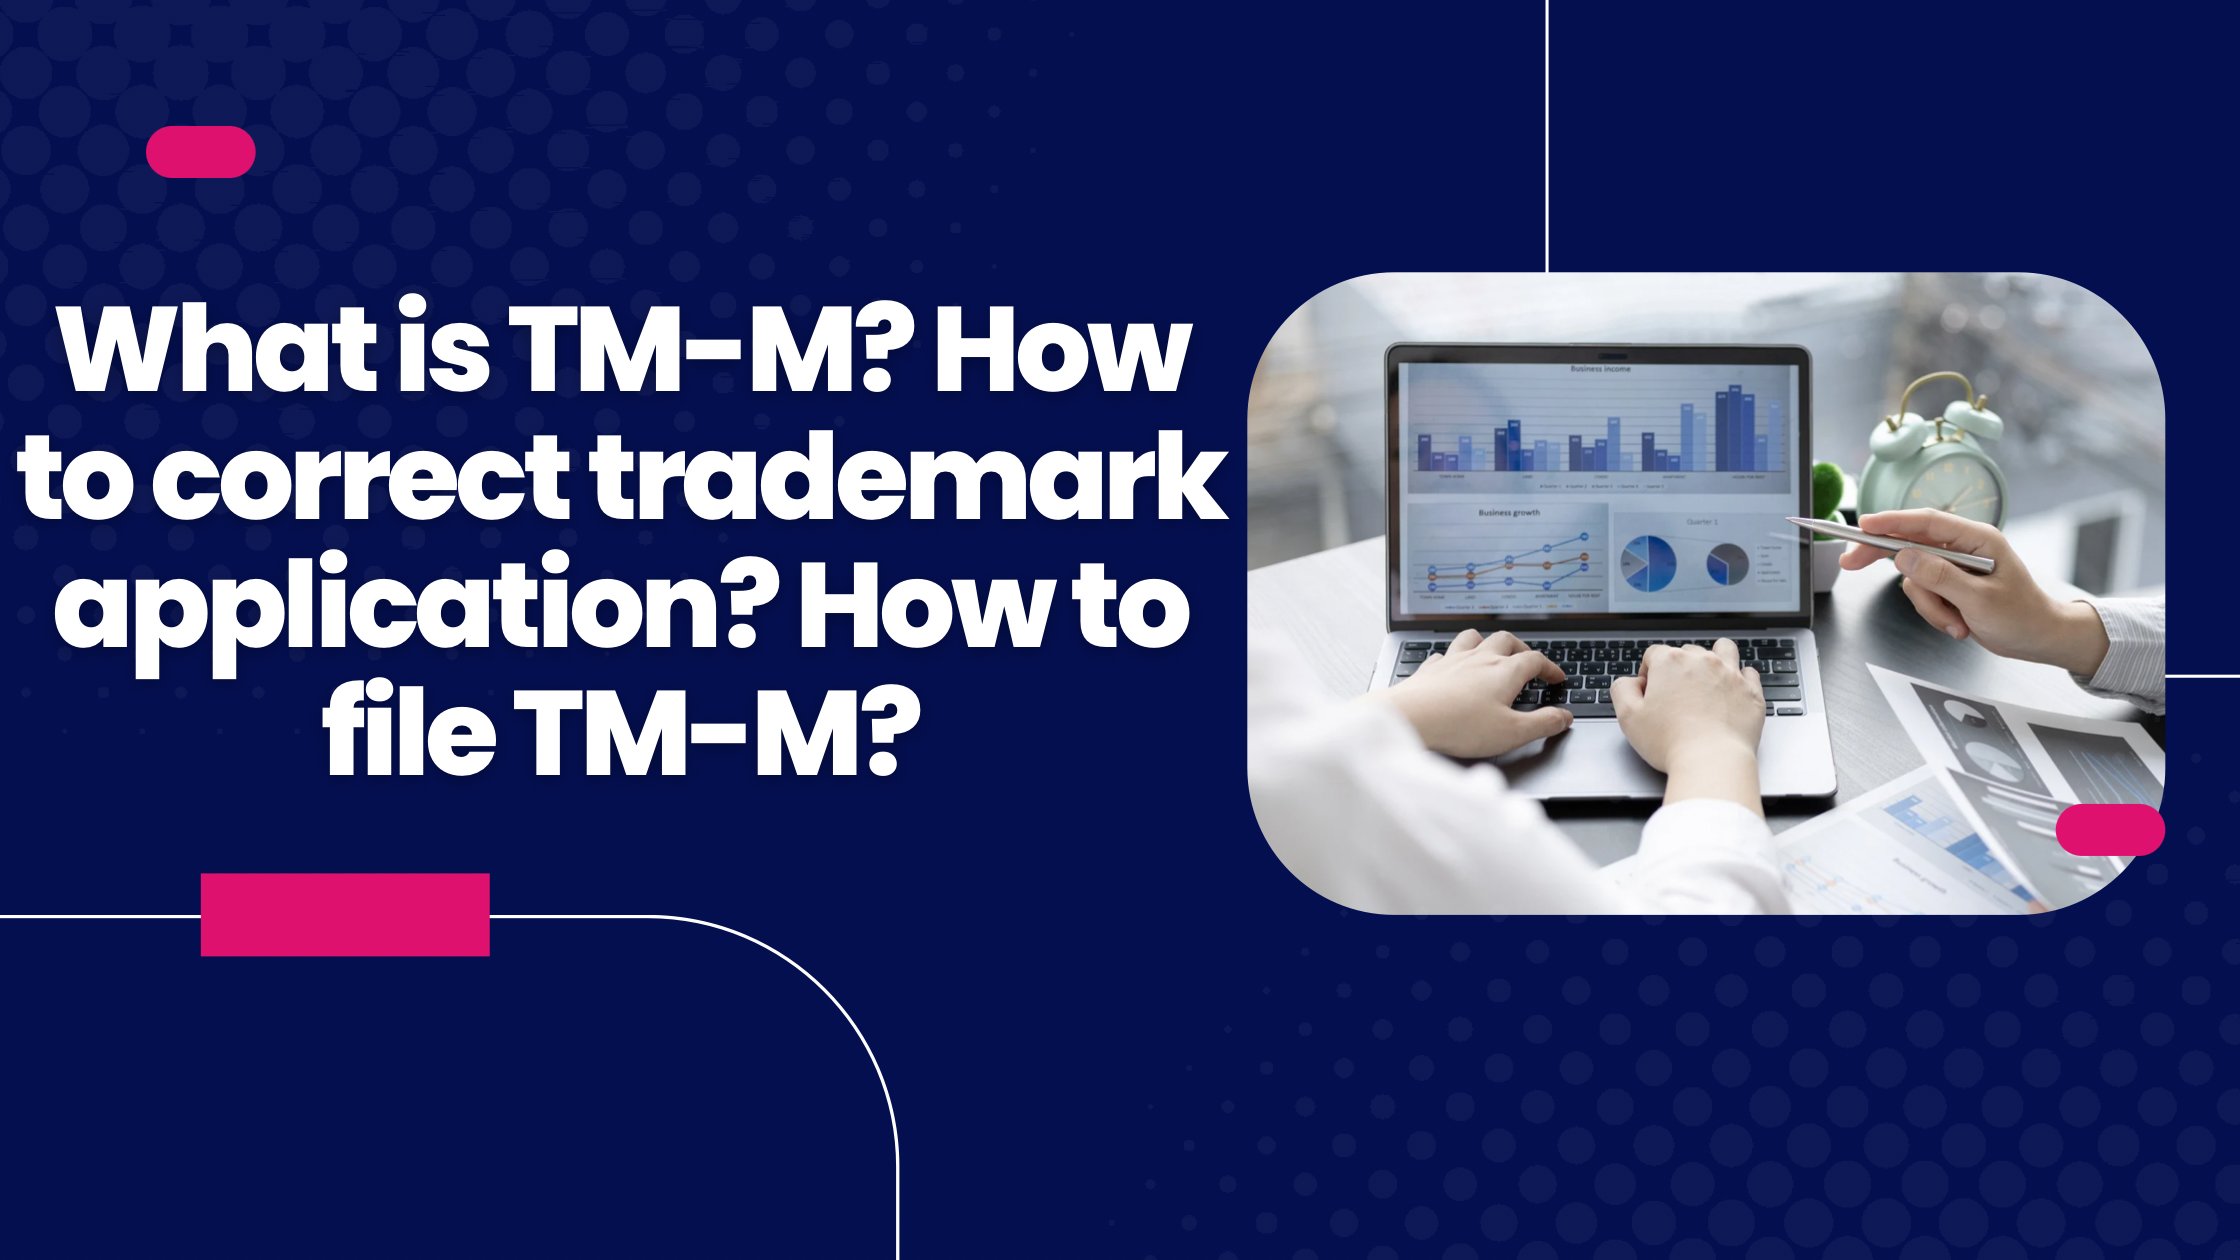 What is TM-M? How to correct trademark application? How to file TM-M?